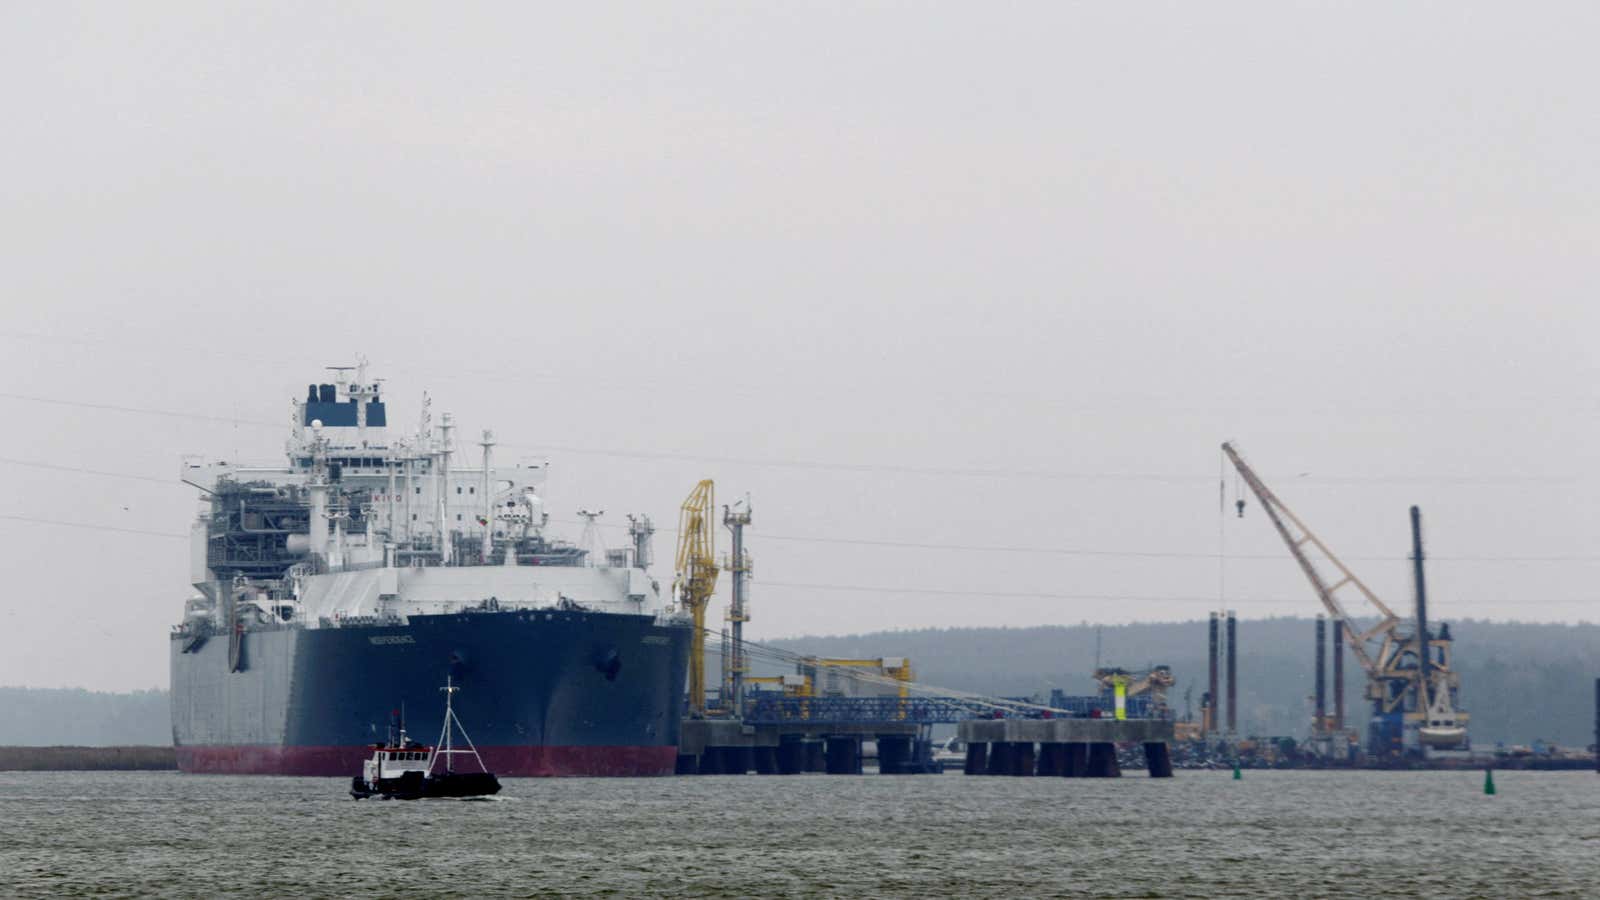 The “Independence,” a floating gas storage unit, docked at the LNG terminal in Klaipeda, Lithuania.